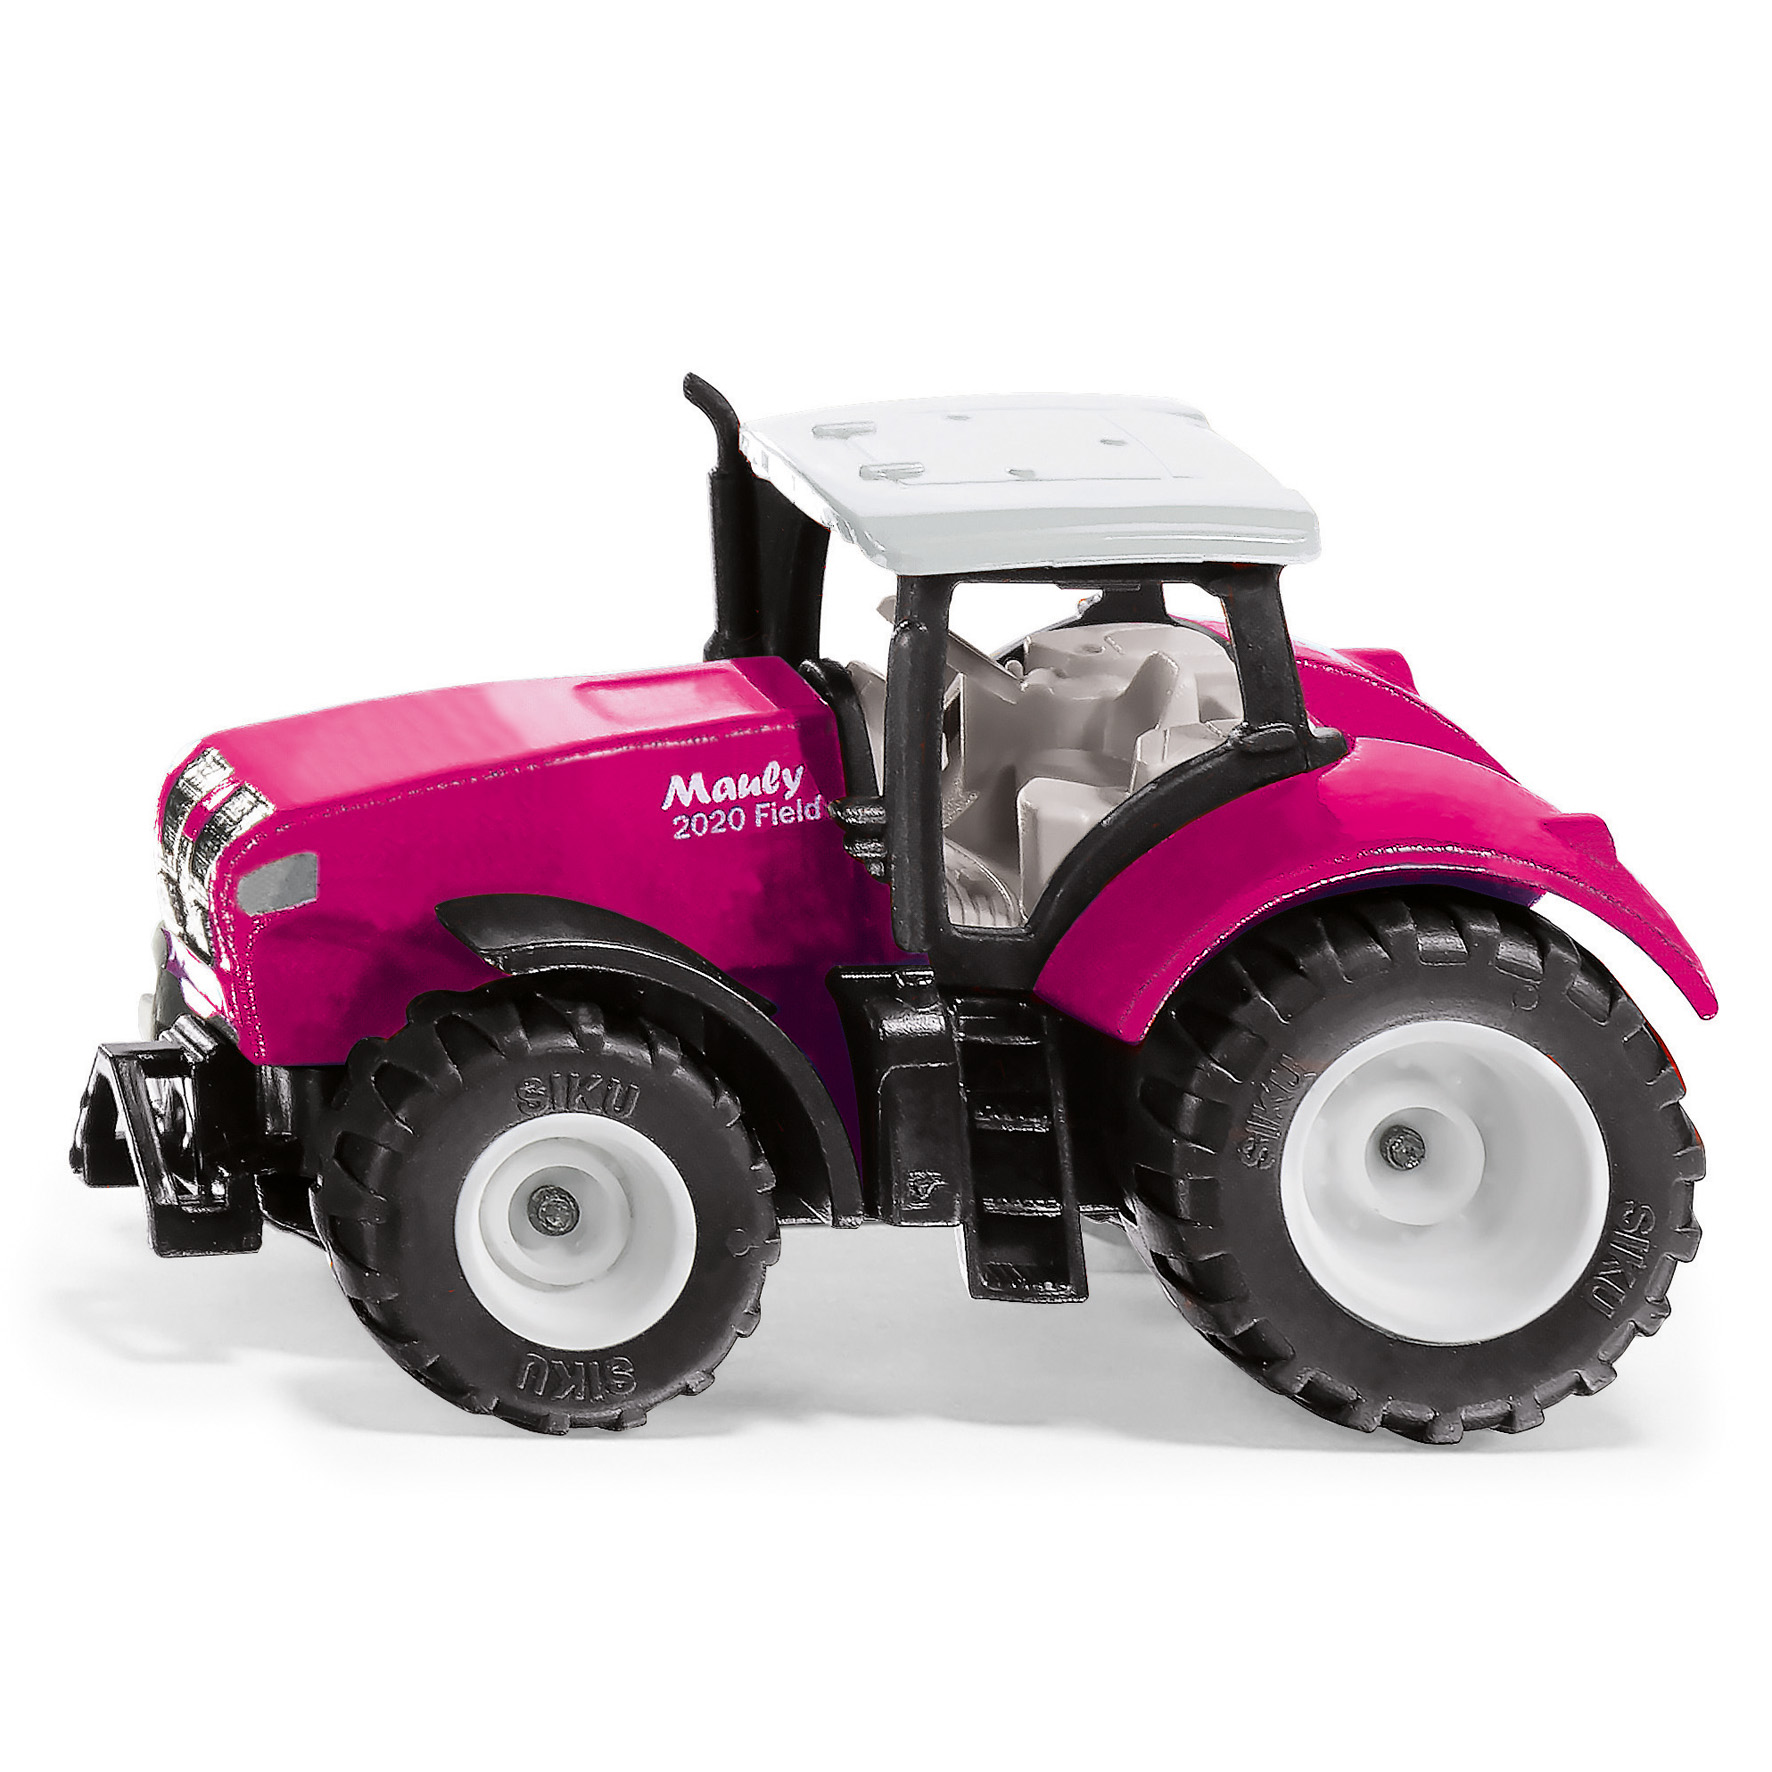 Tractors & Agricultural Vehicles mauly x540 tractor pink